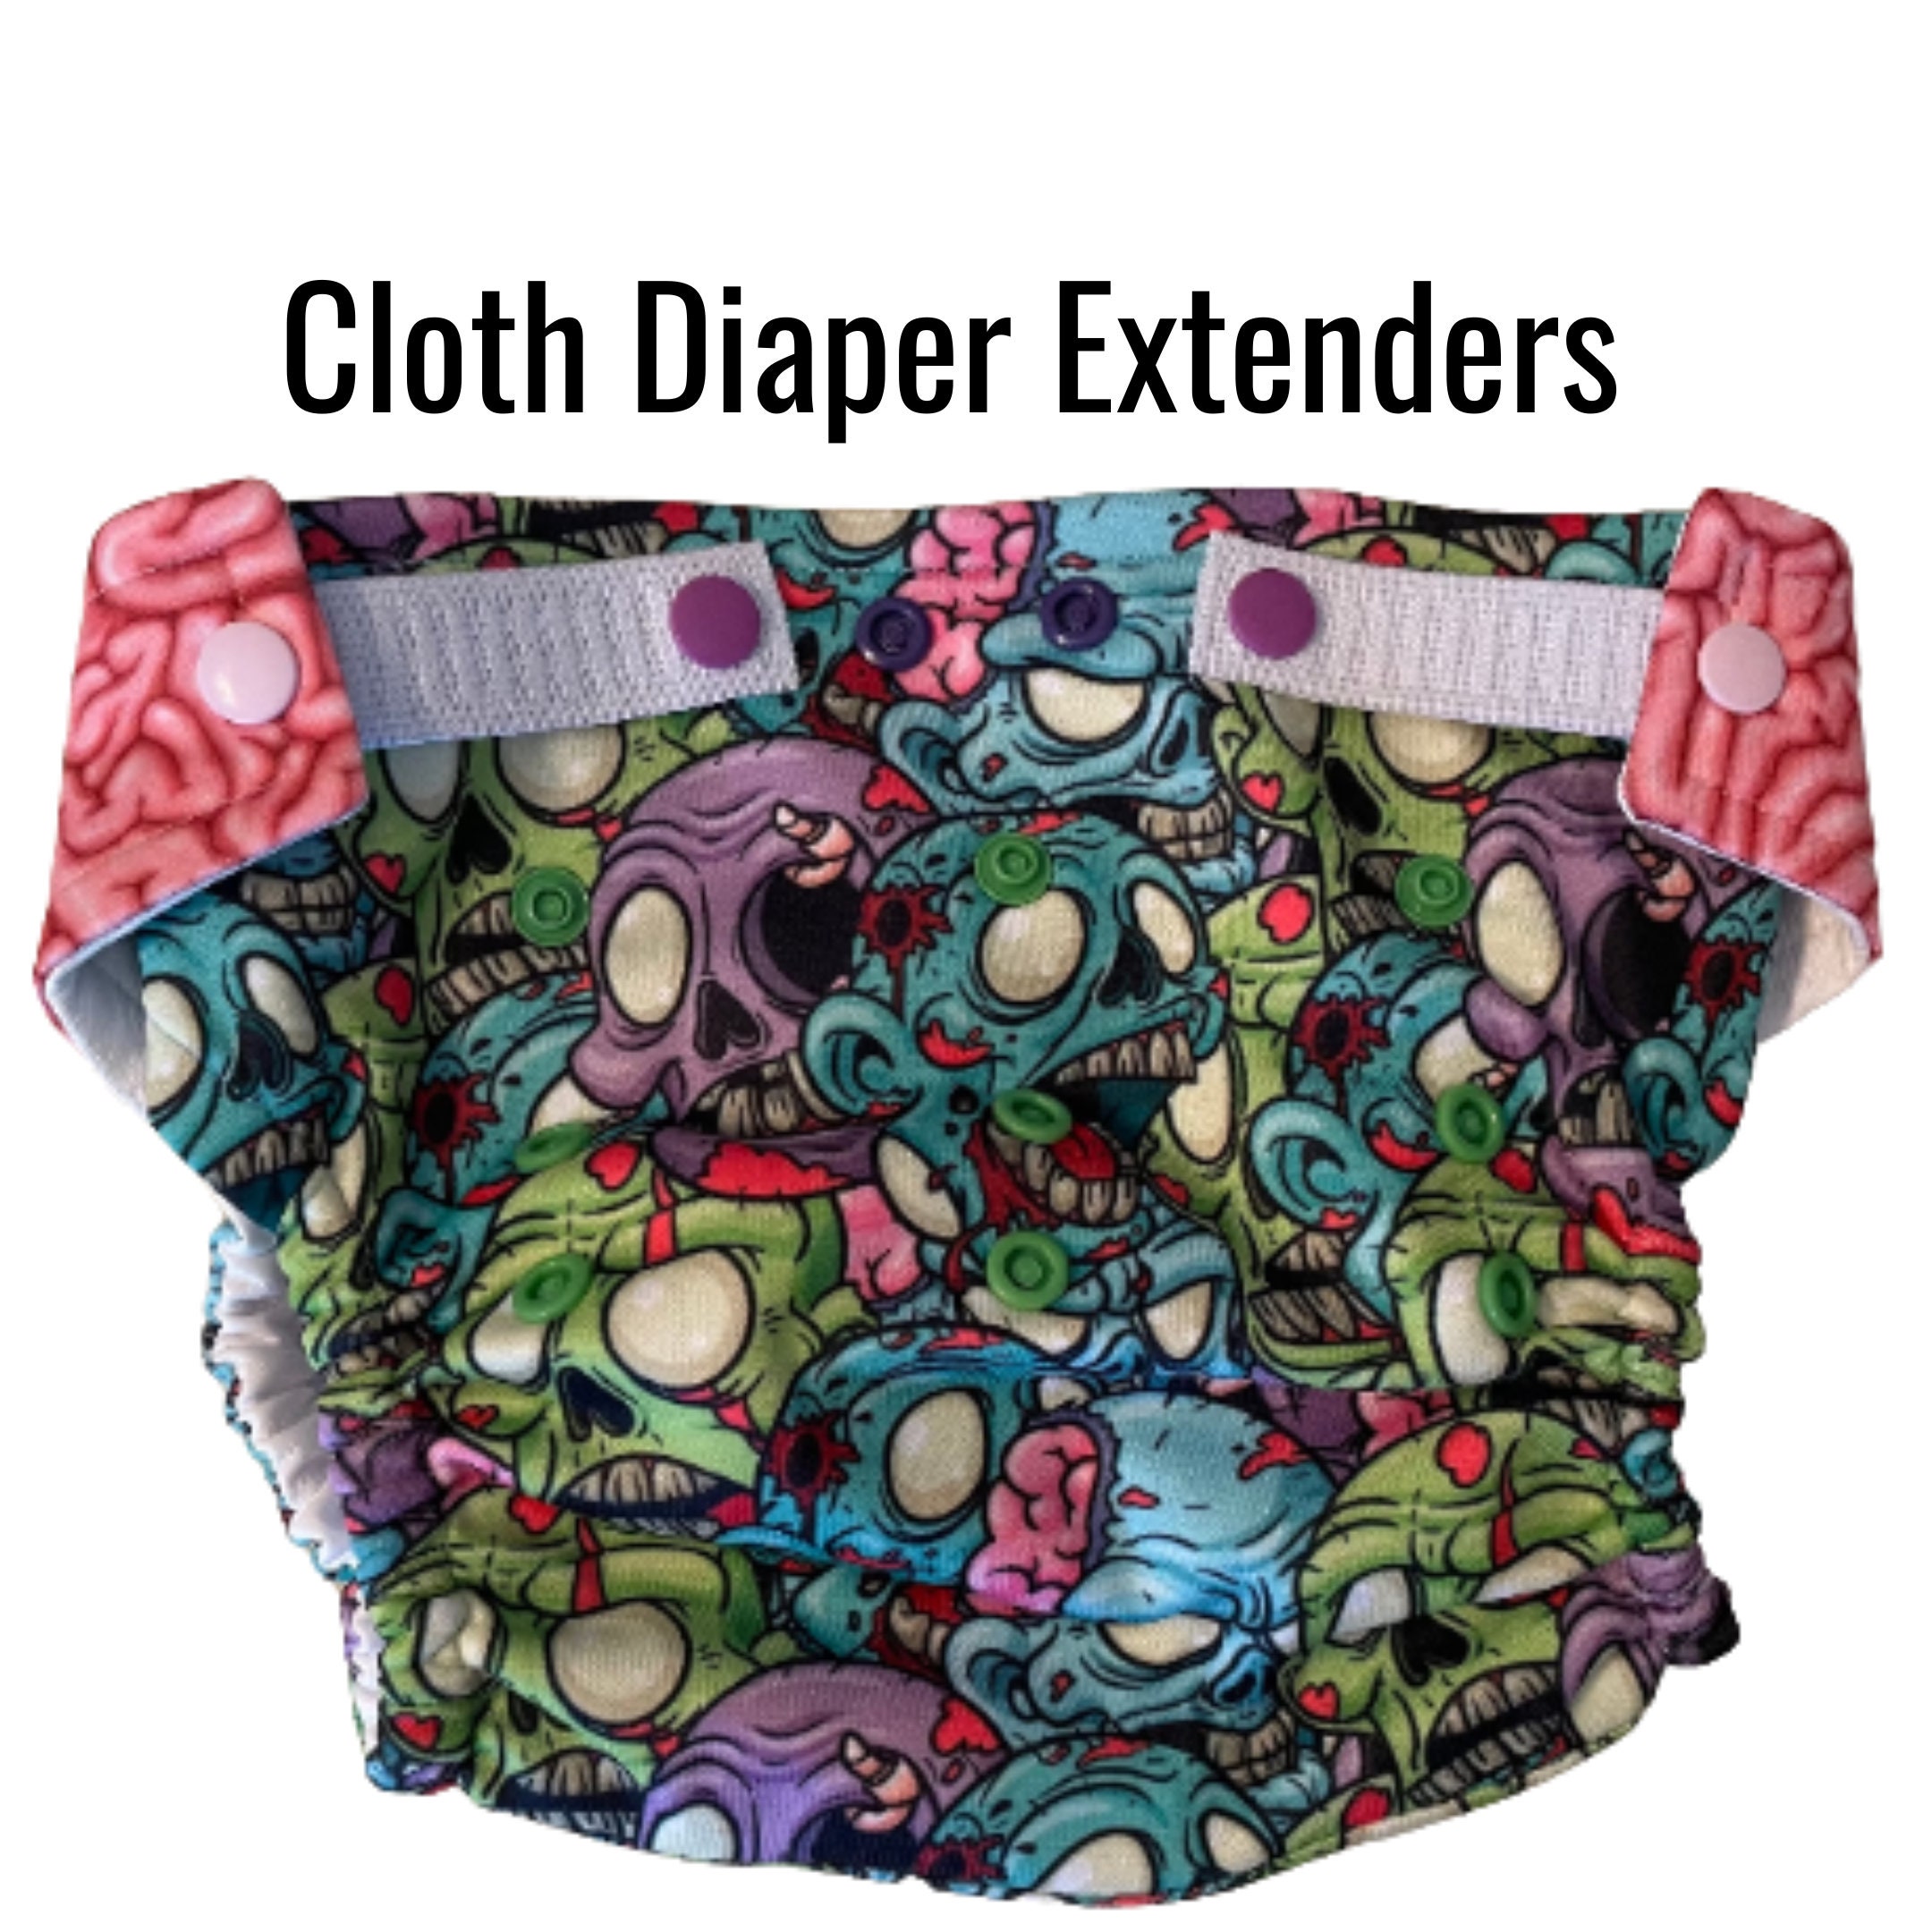 Cloth Diaper Extender or Training Pants Conversion With Alva